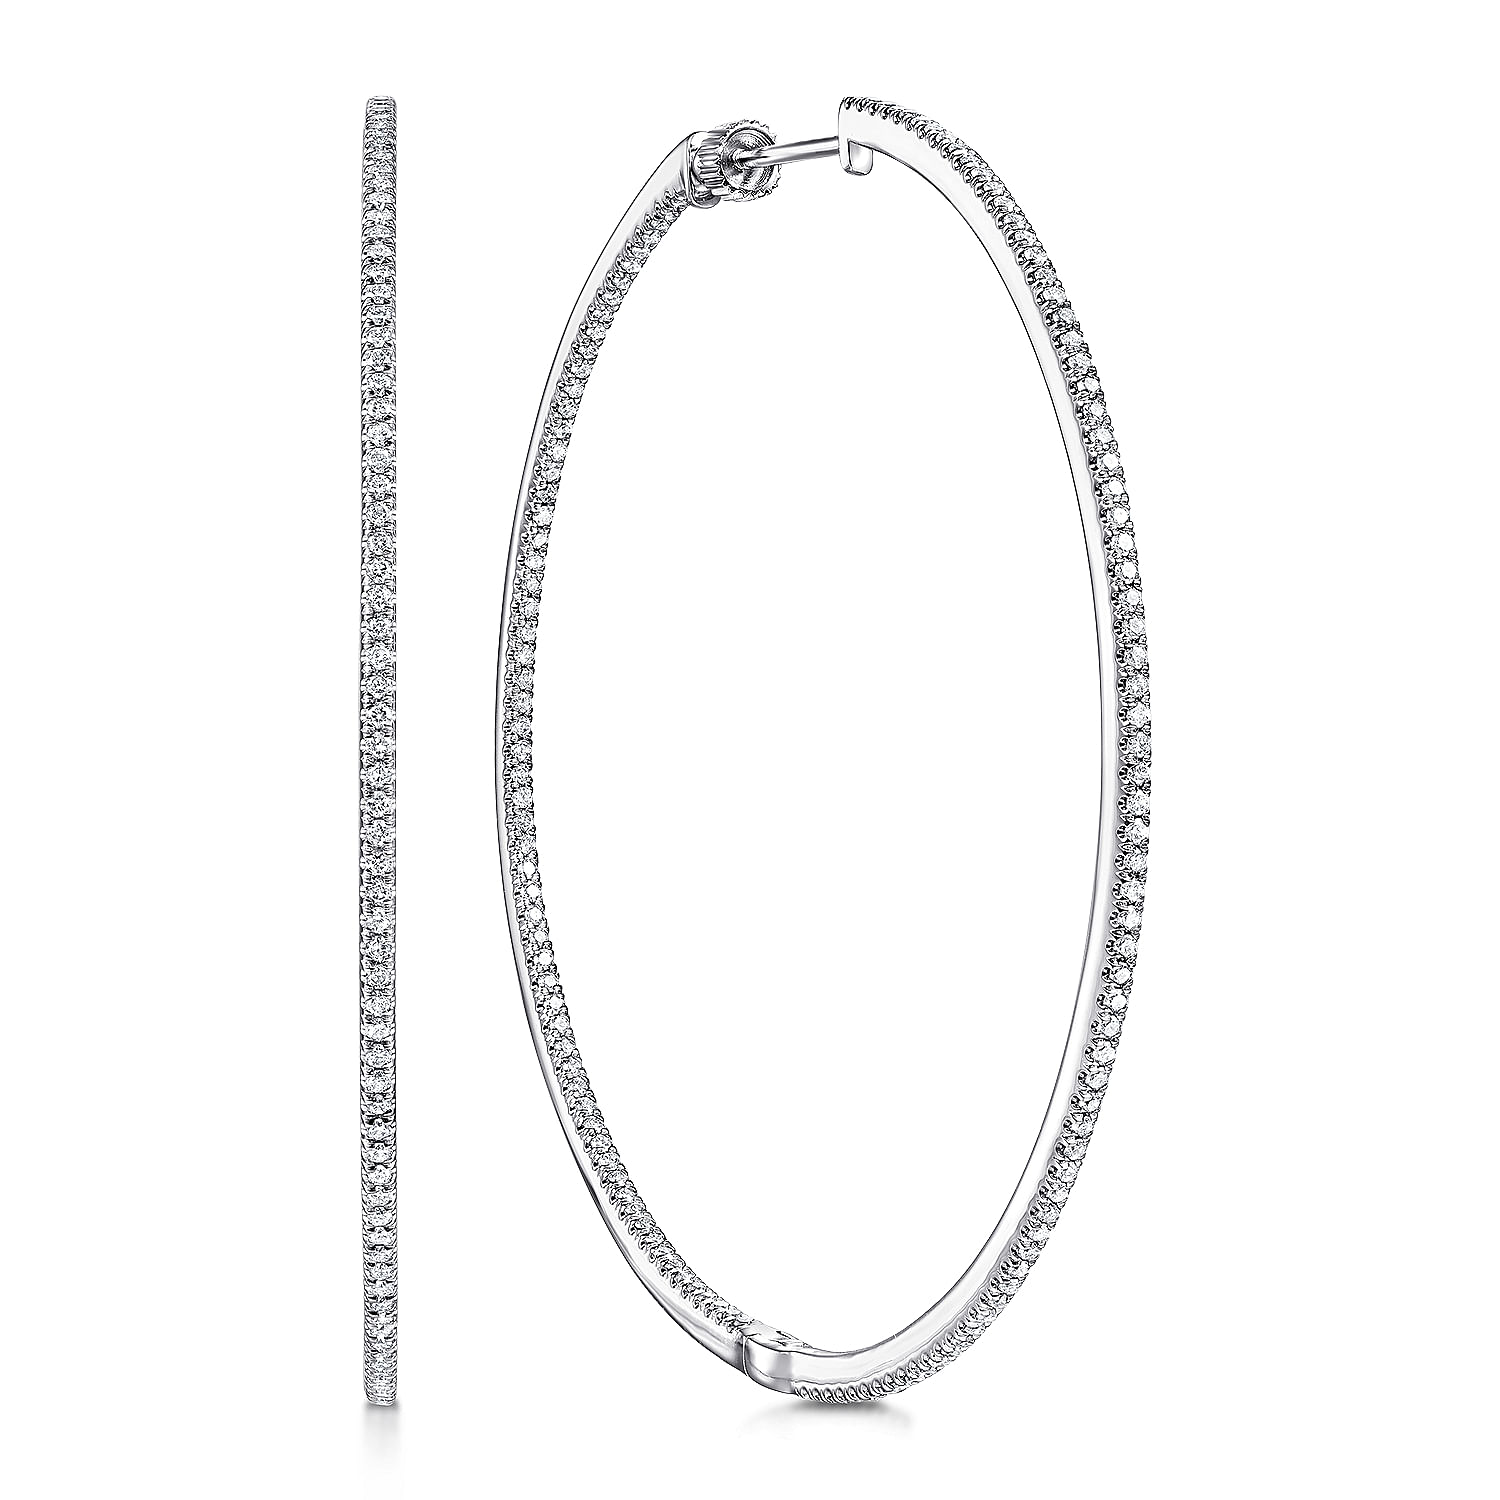 14K White Gold French Pave 60mm Round Inside Out Diamond Hoop Earrings